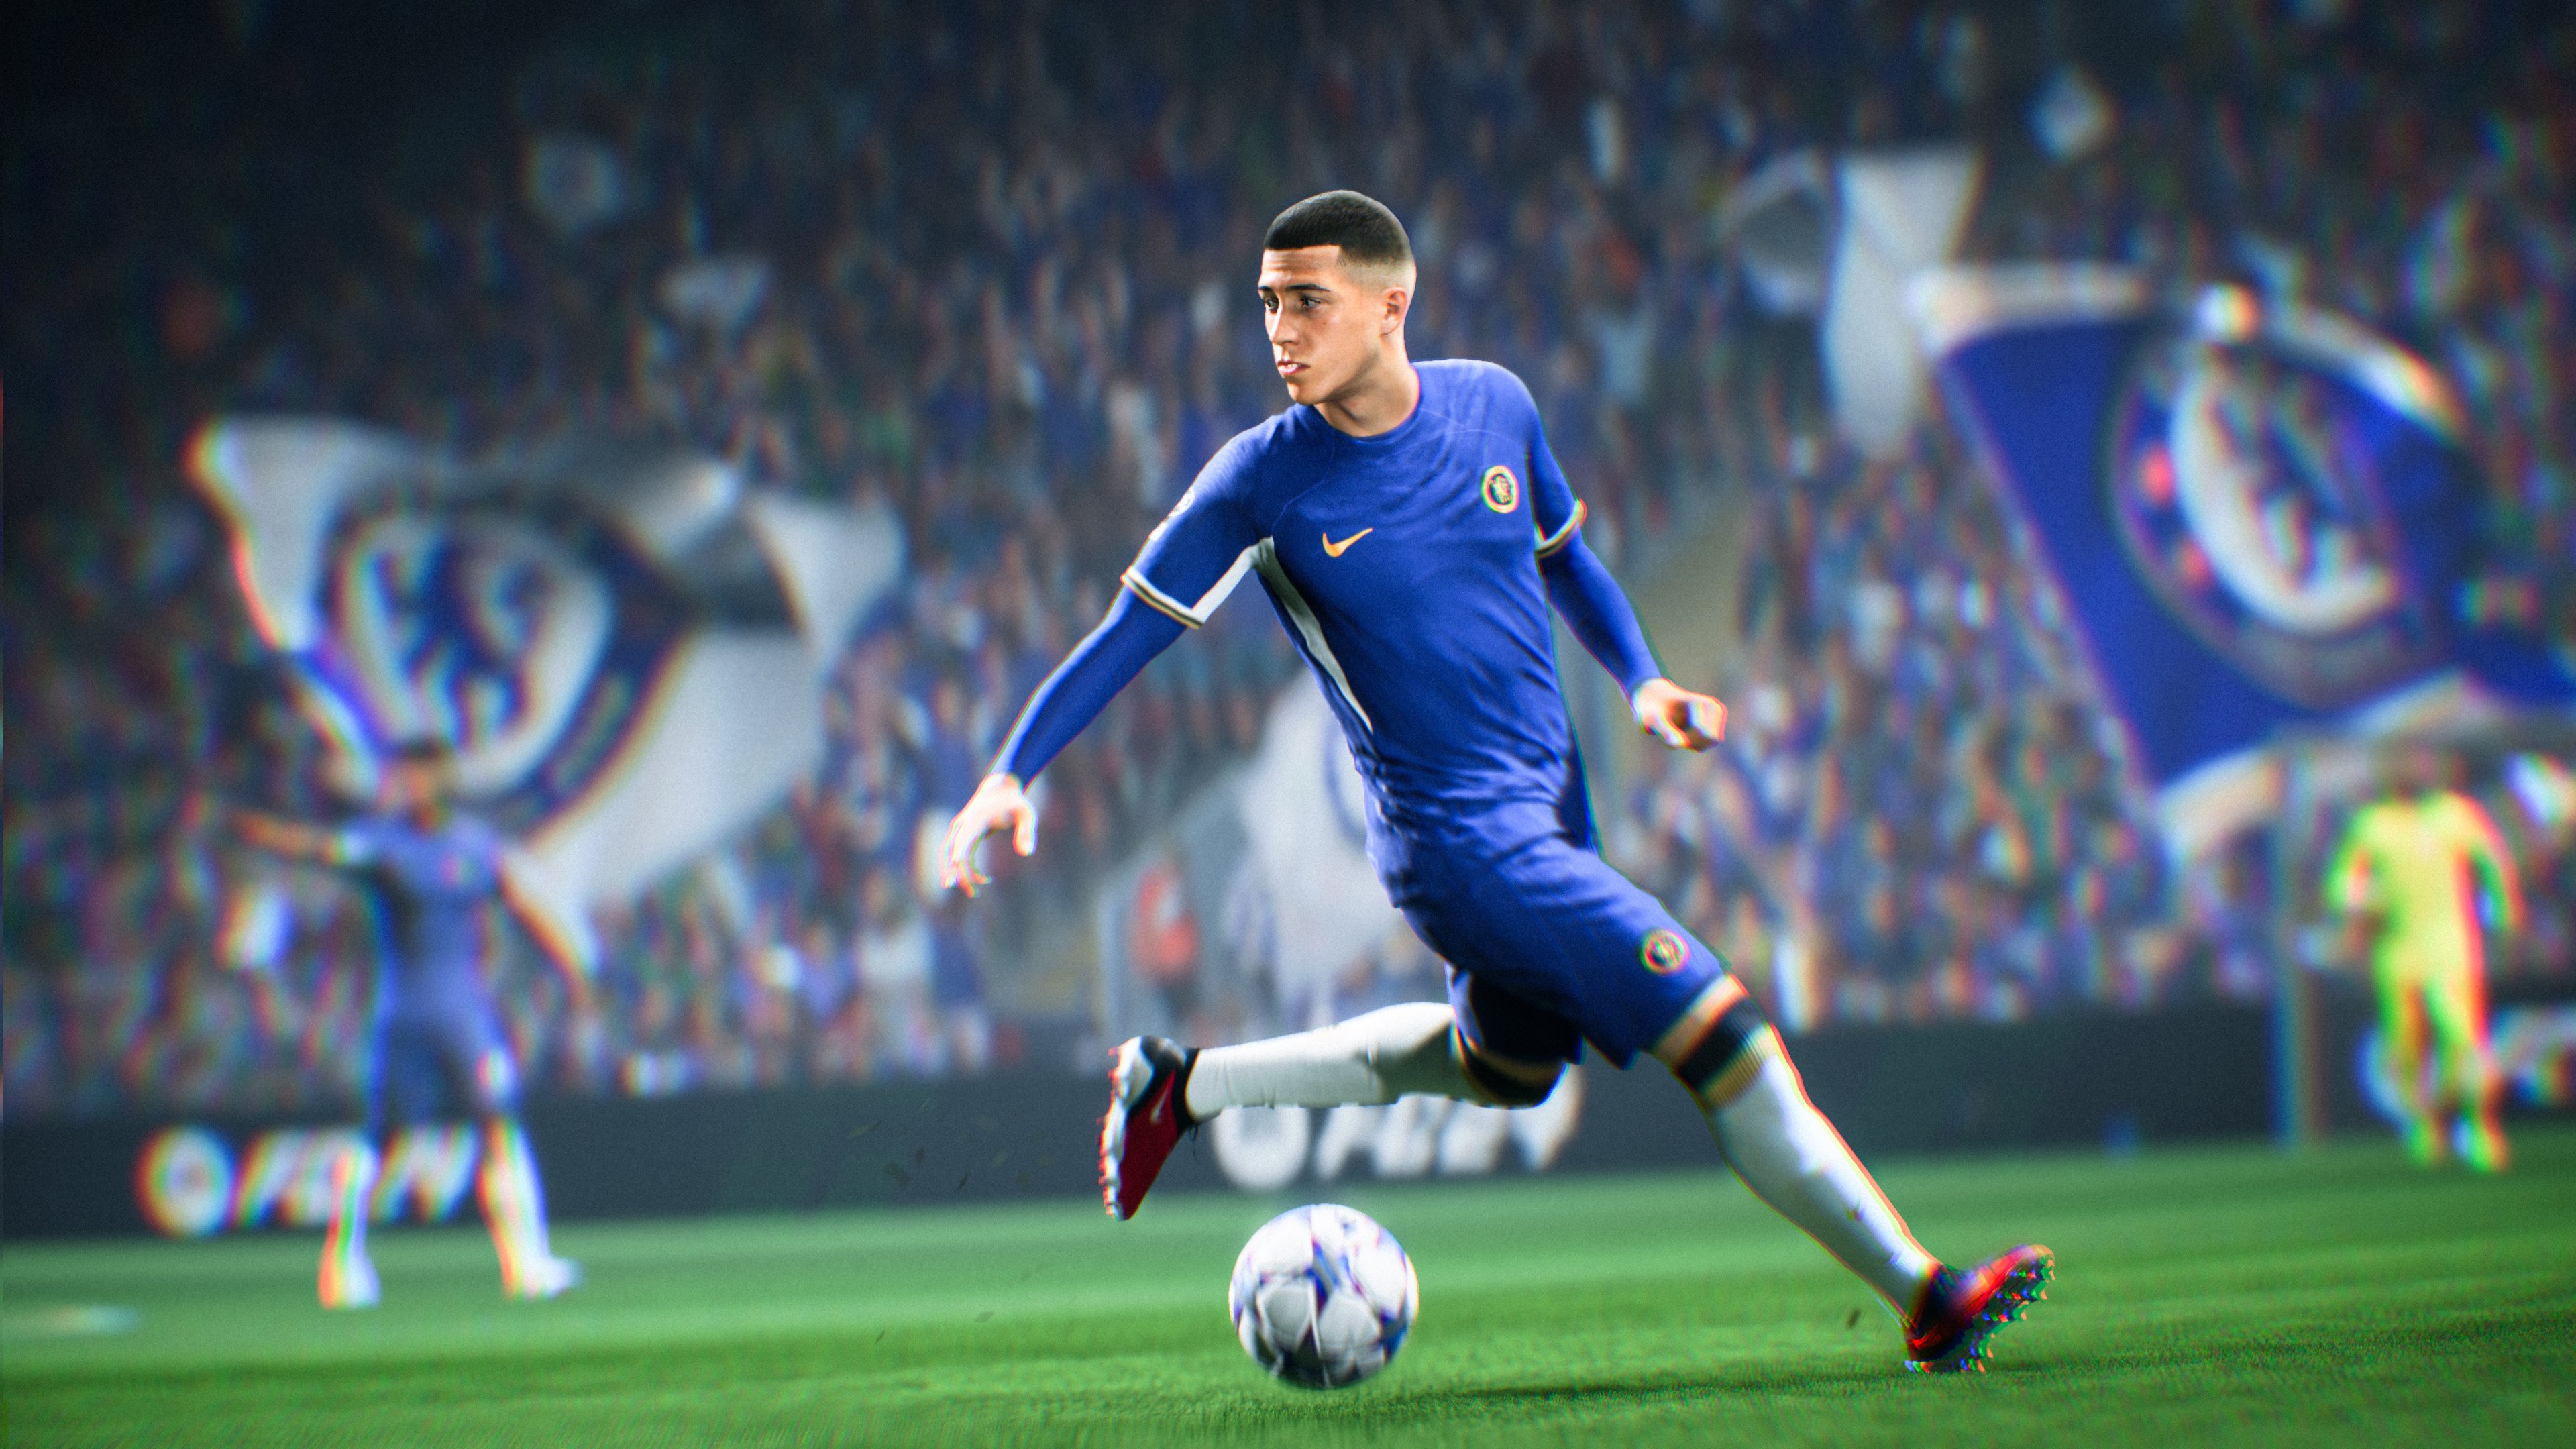 FIFA 23 Down: Servers, Disconnecting, Maintenance & more